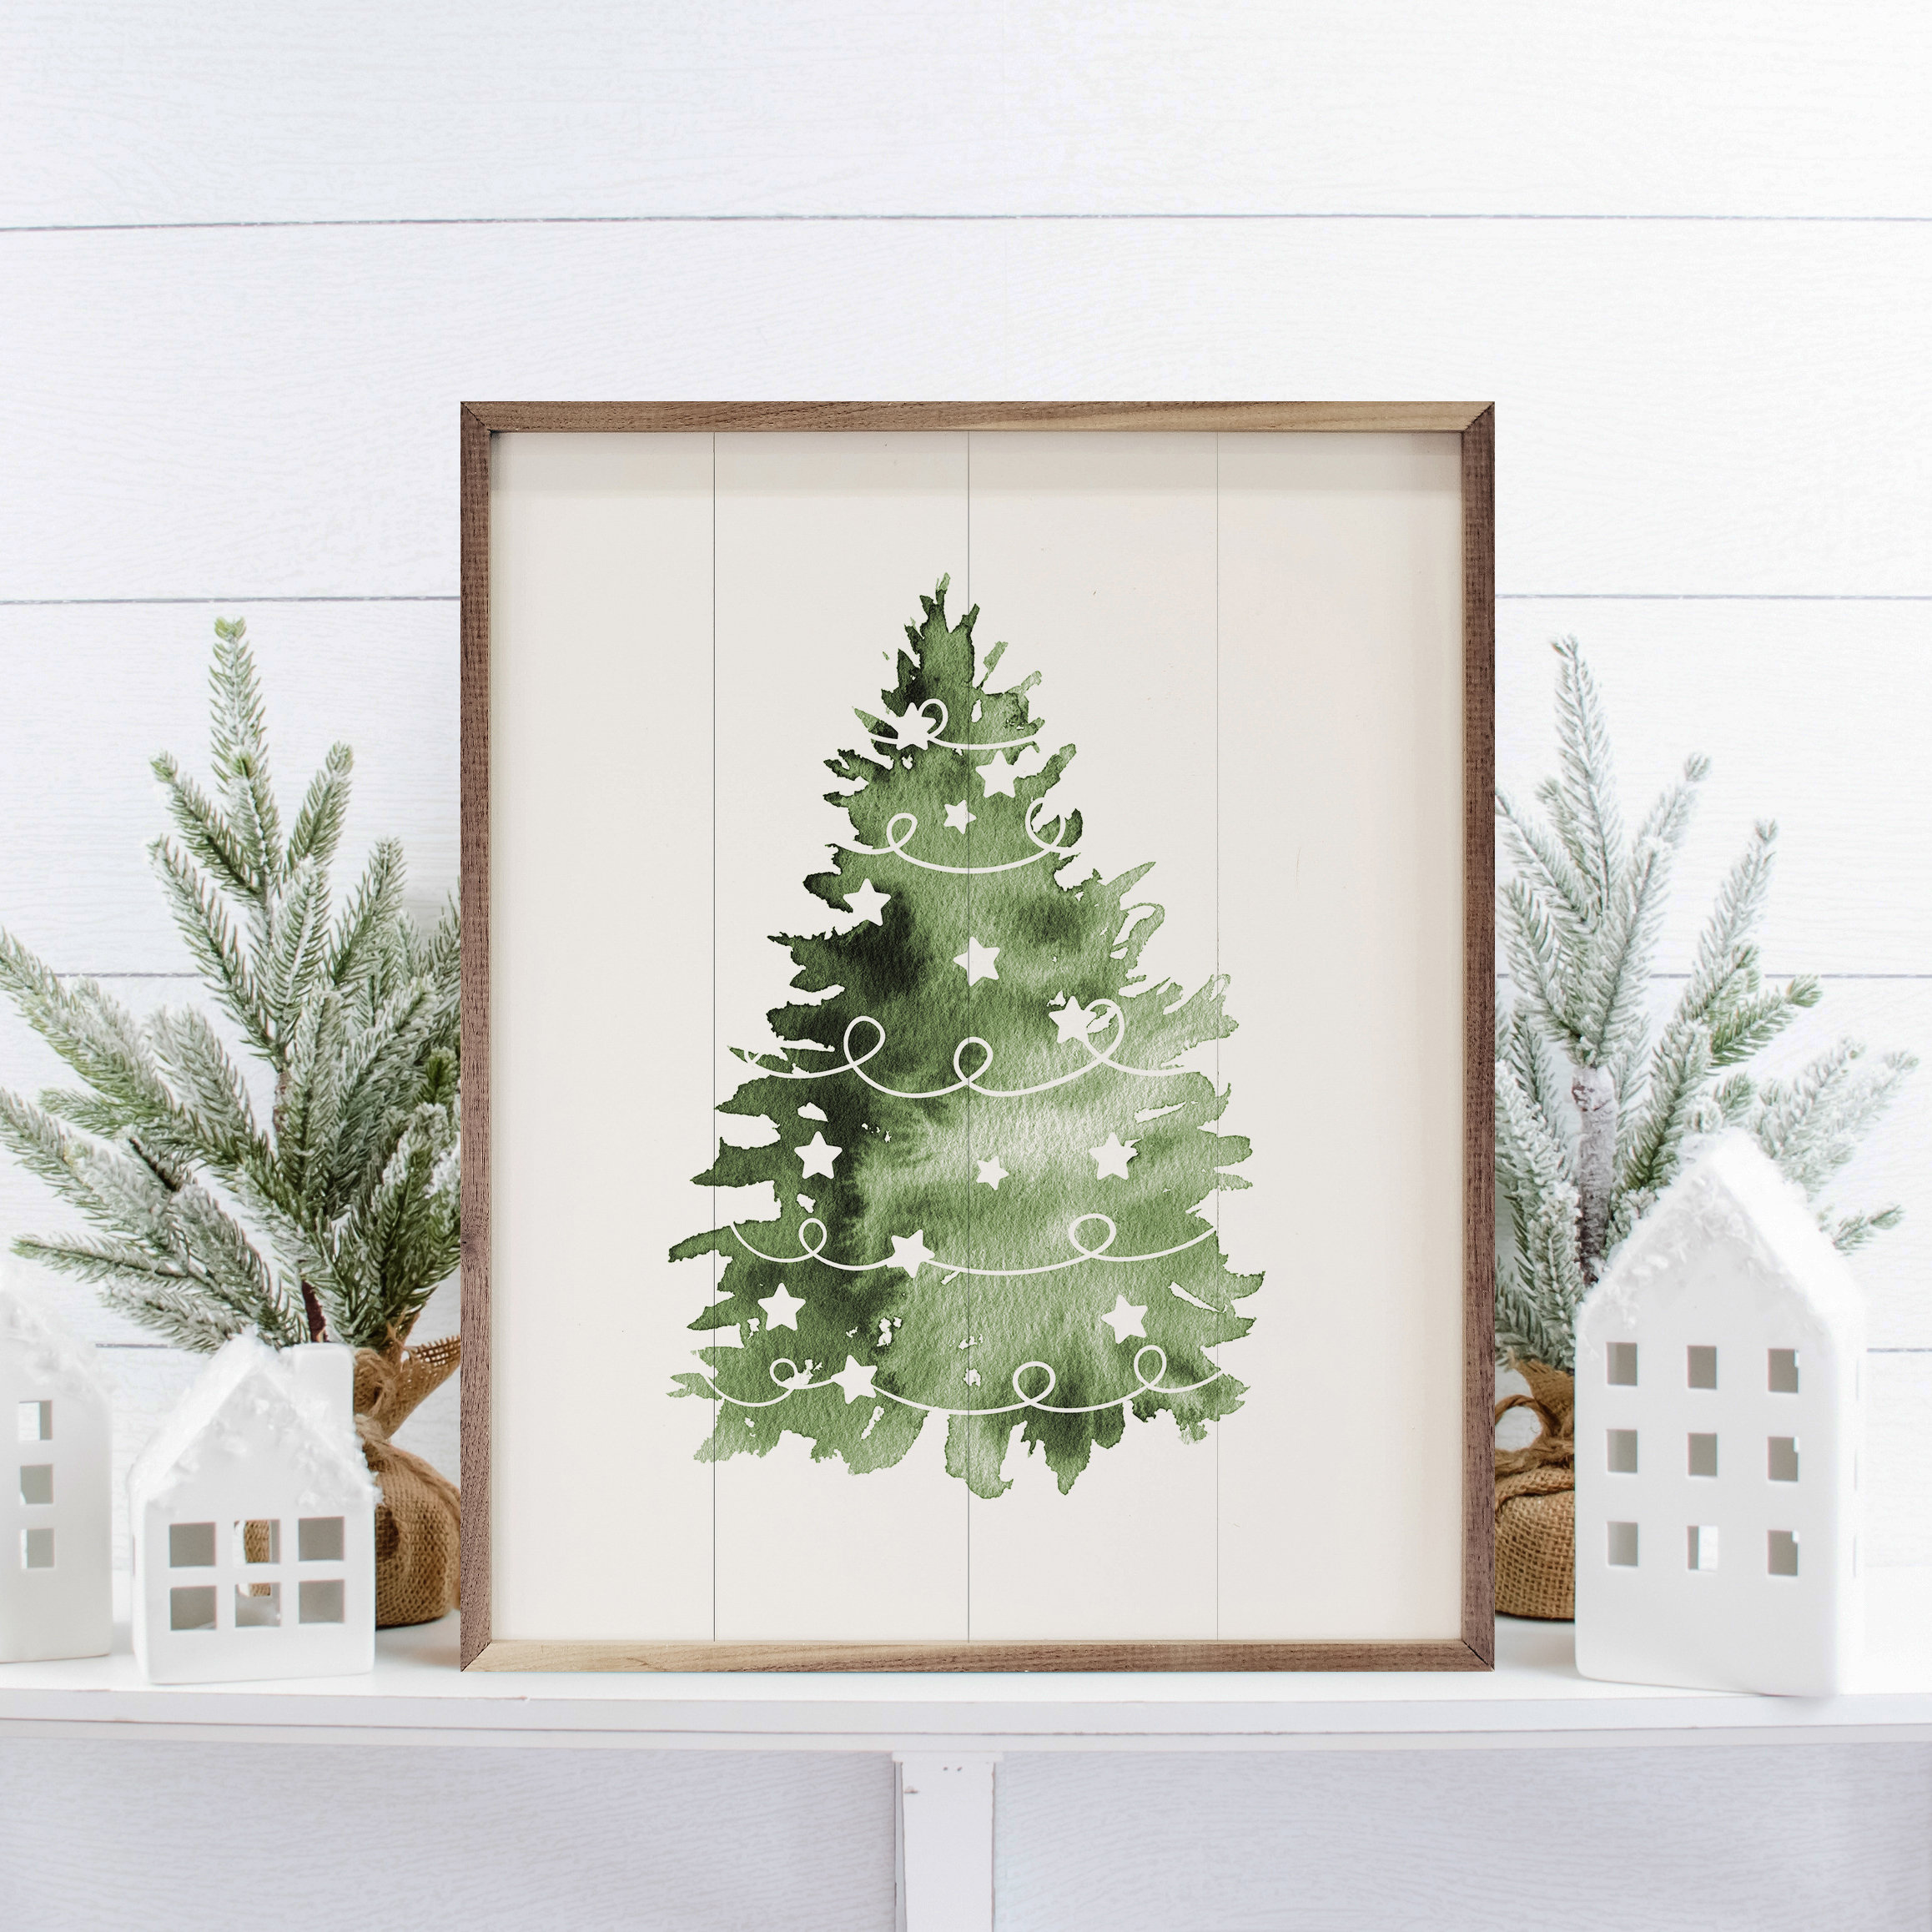 Painting of Christmas trees on an easel, palette, brush